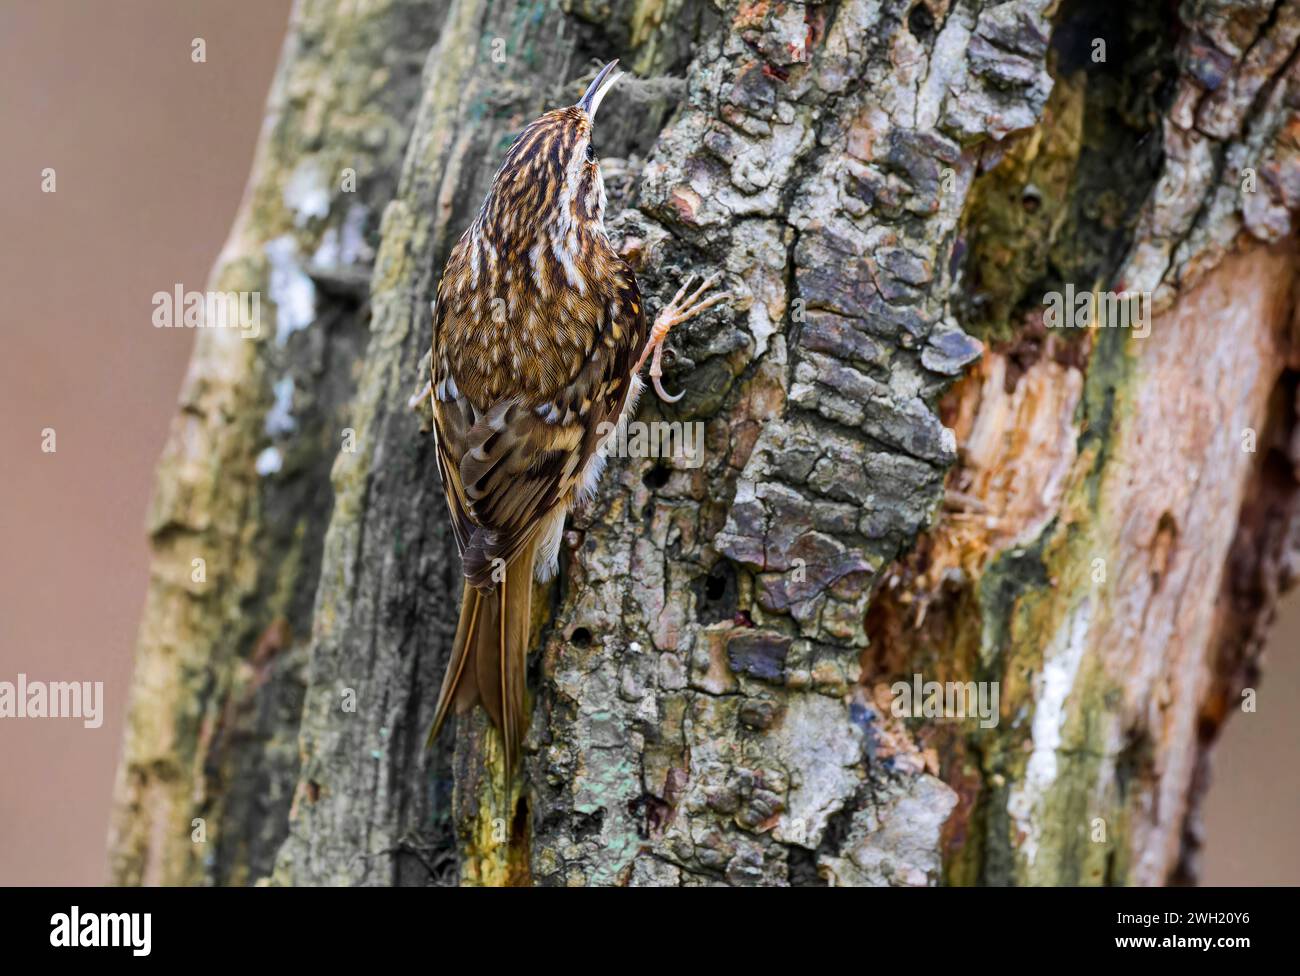 A camouflaged Treecreeper, (Certhia familiaris), clinging to the side of a tree trunk Stock Photo